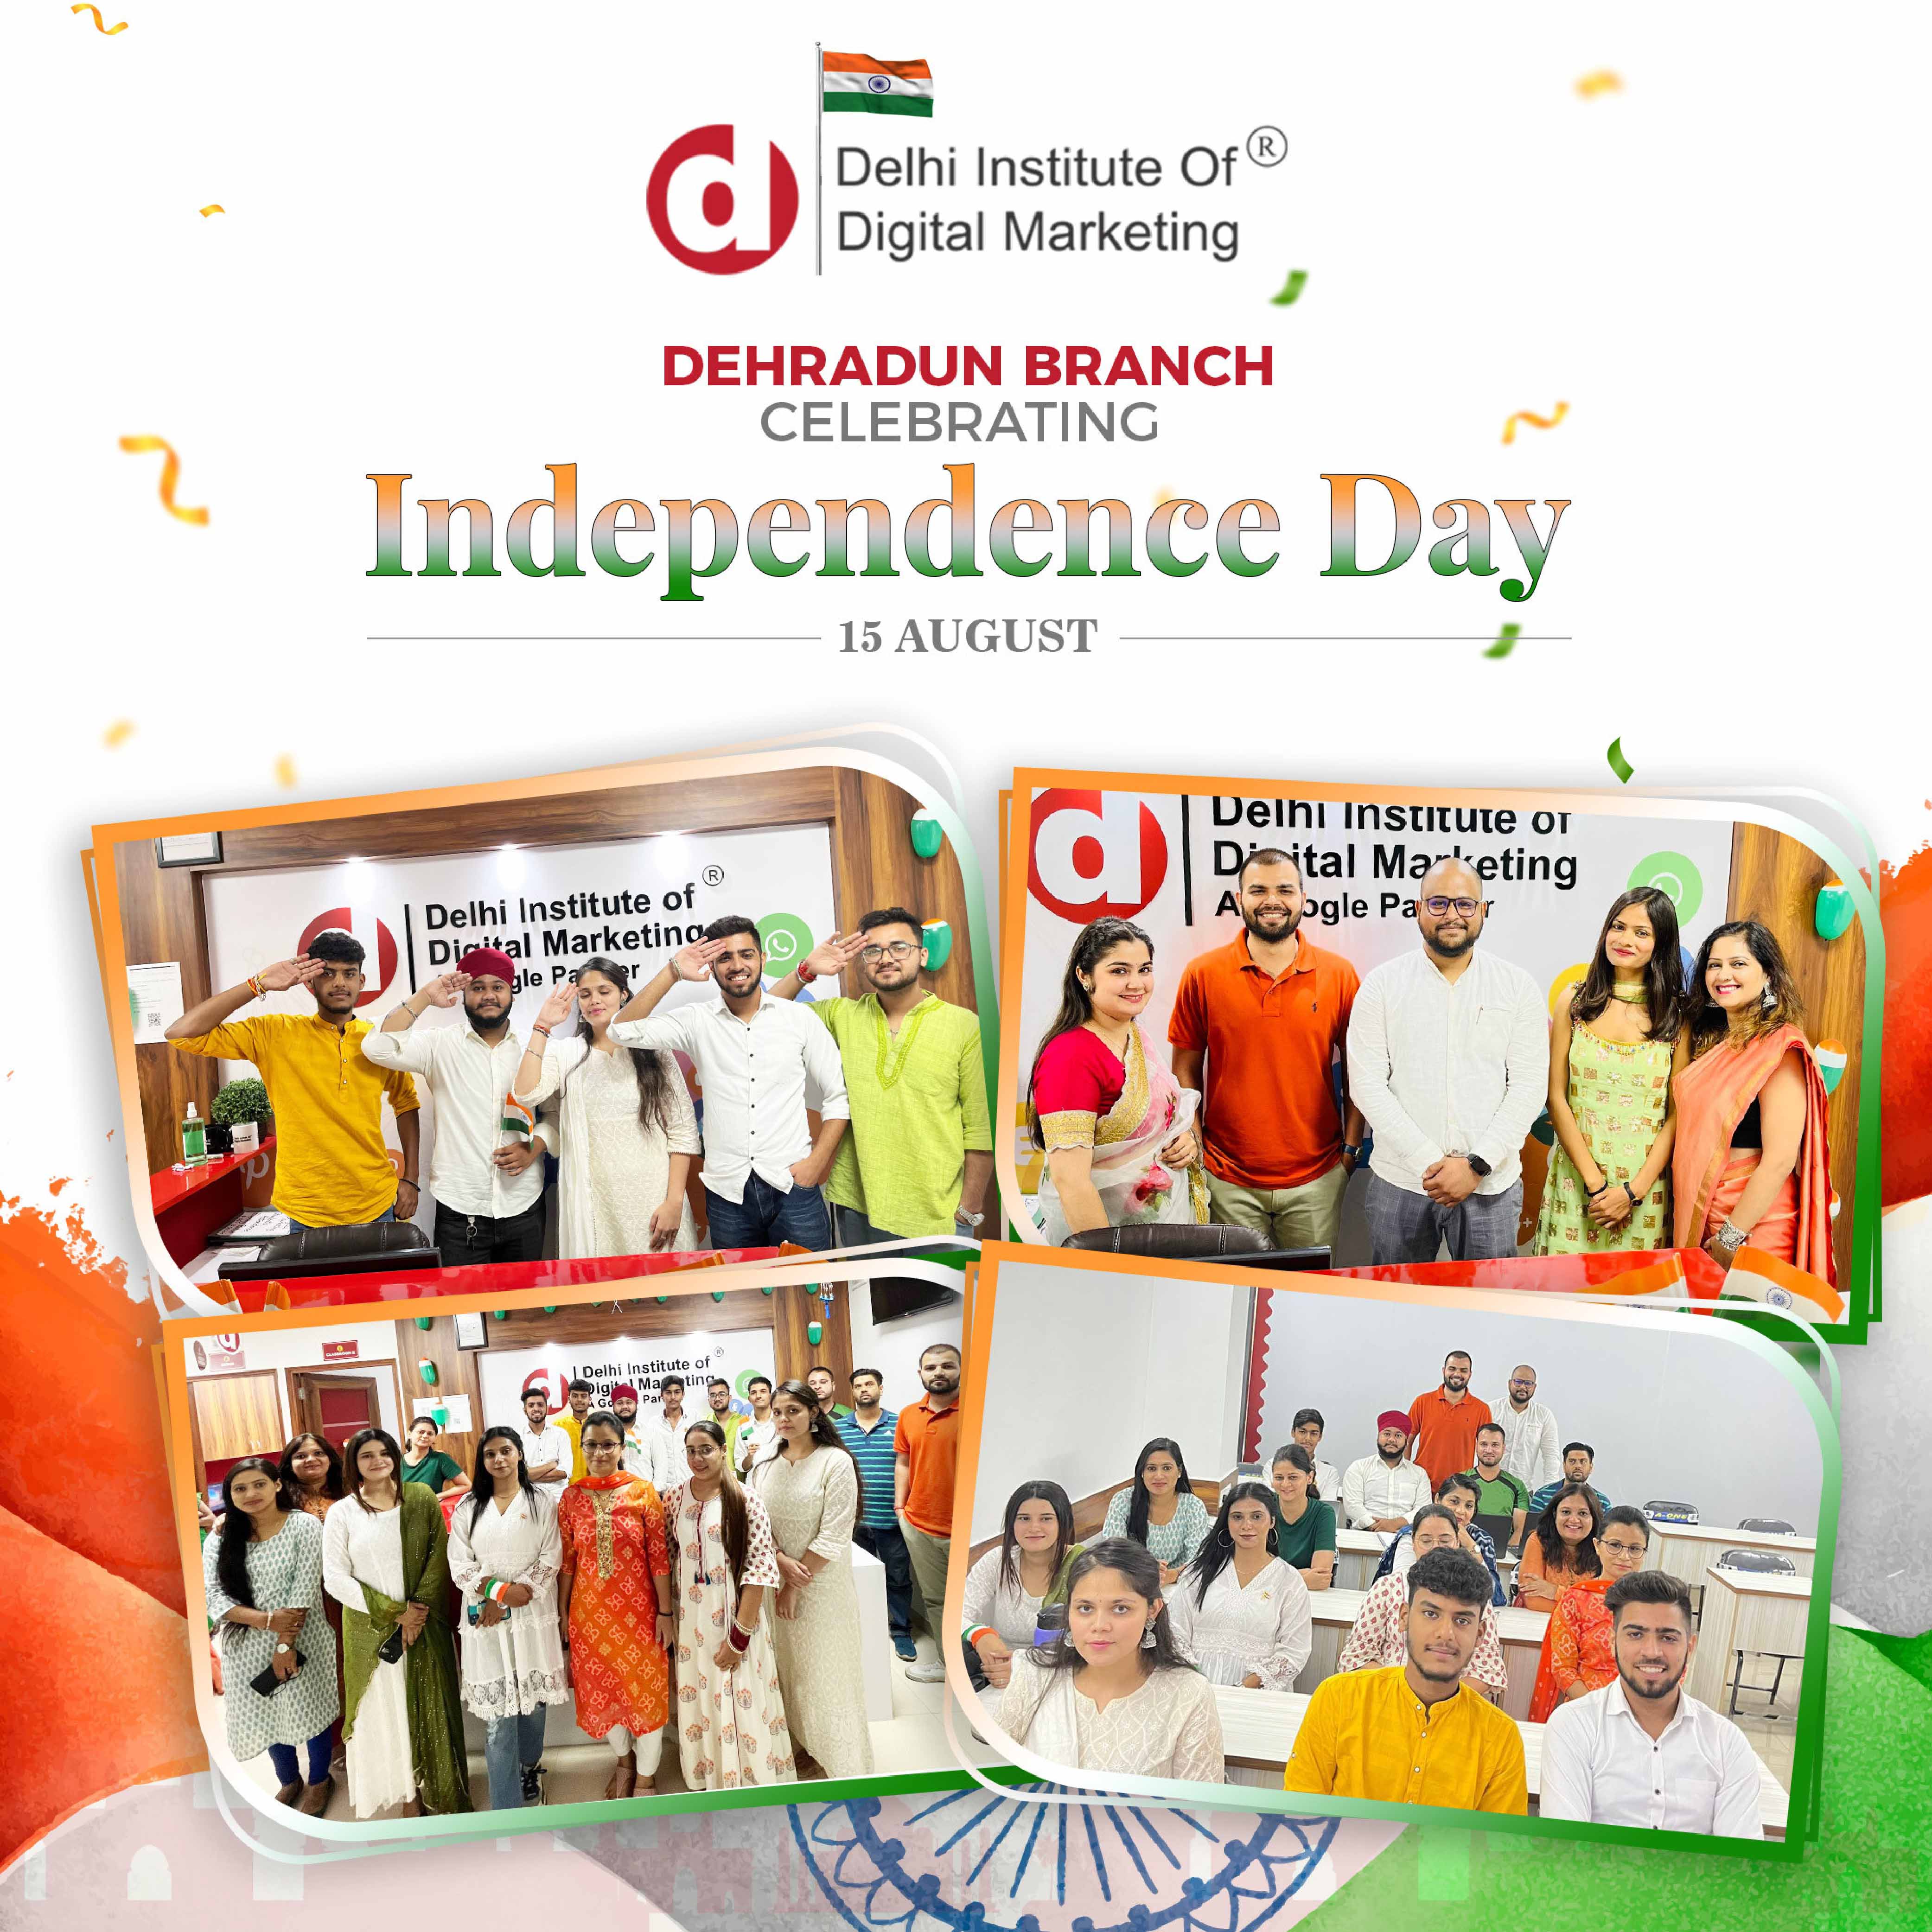 DIDM Dehradun Branch is celebrating its 77th Independence Day